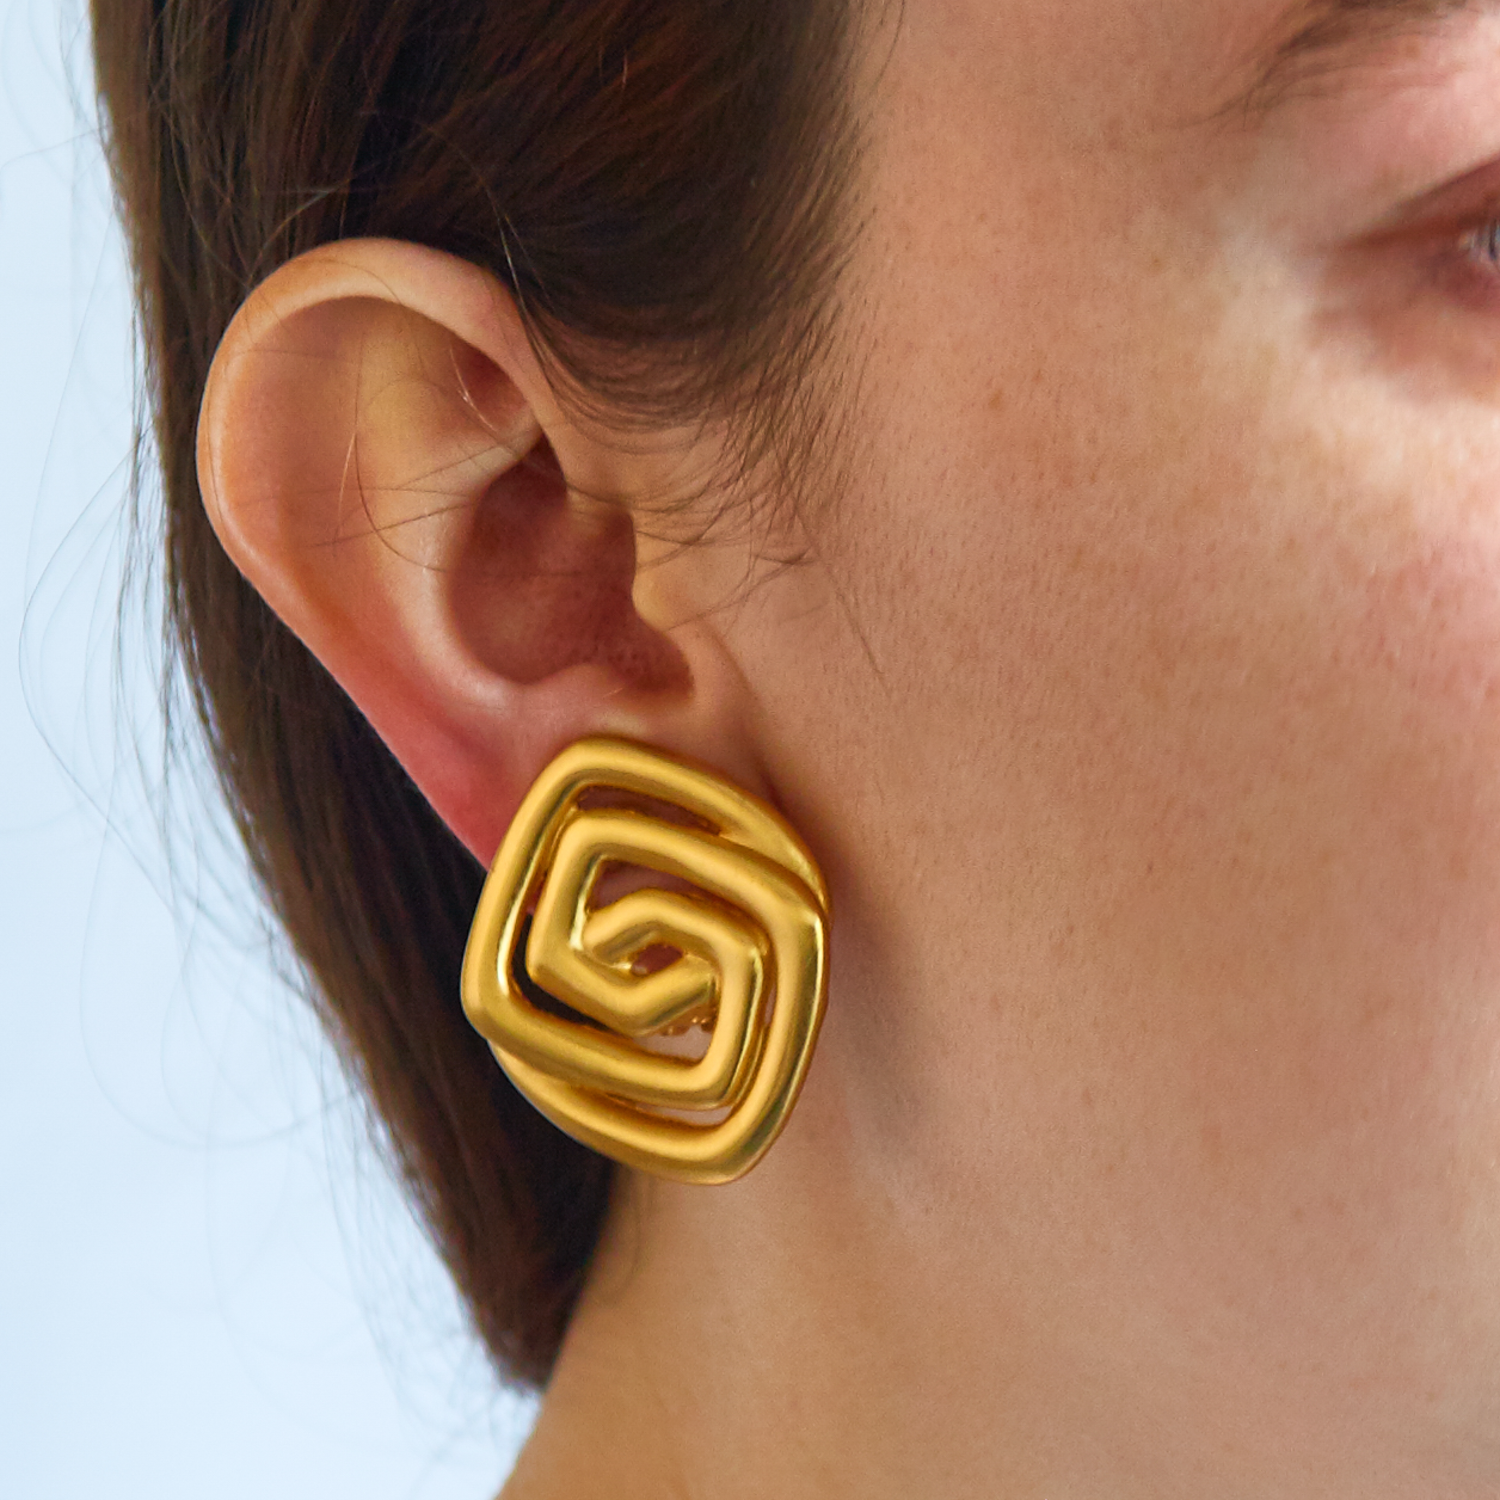 Vintage Gold Square Spiral Earrings